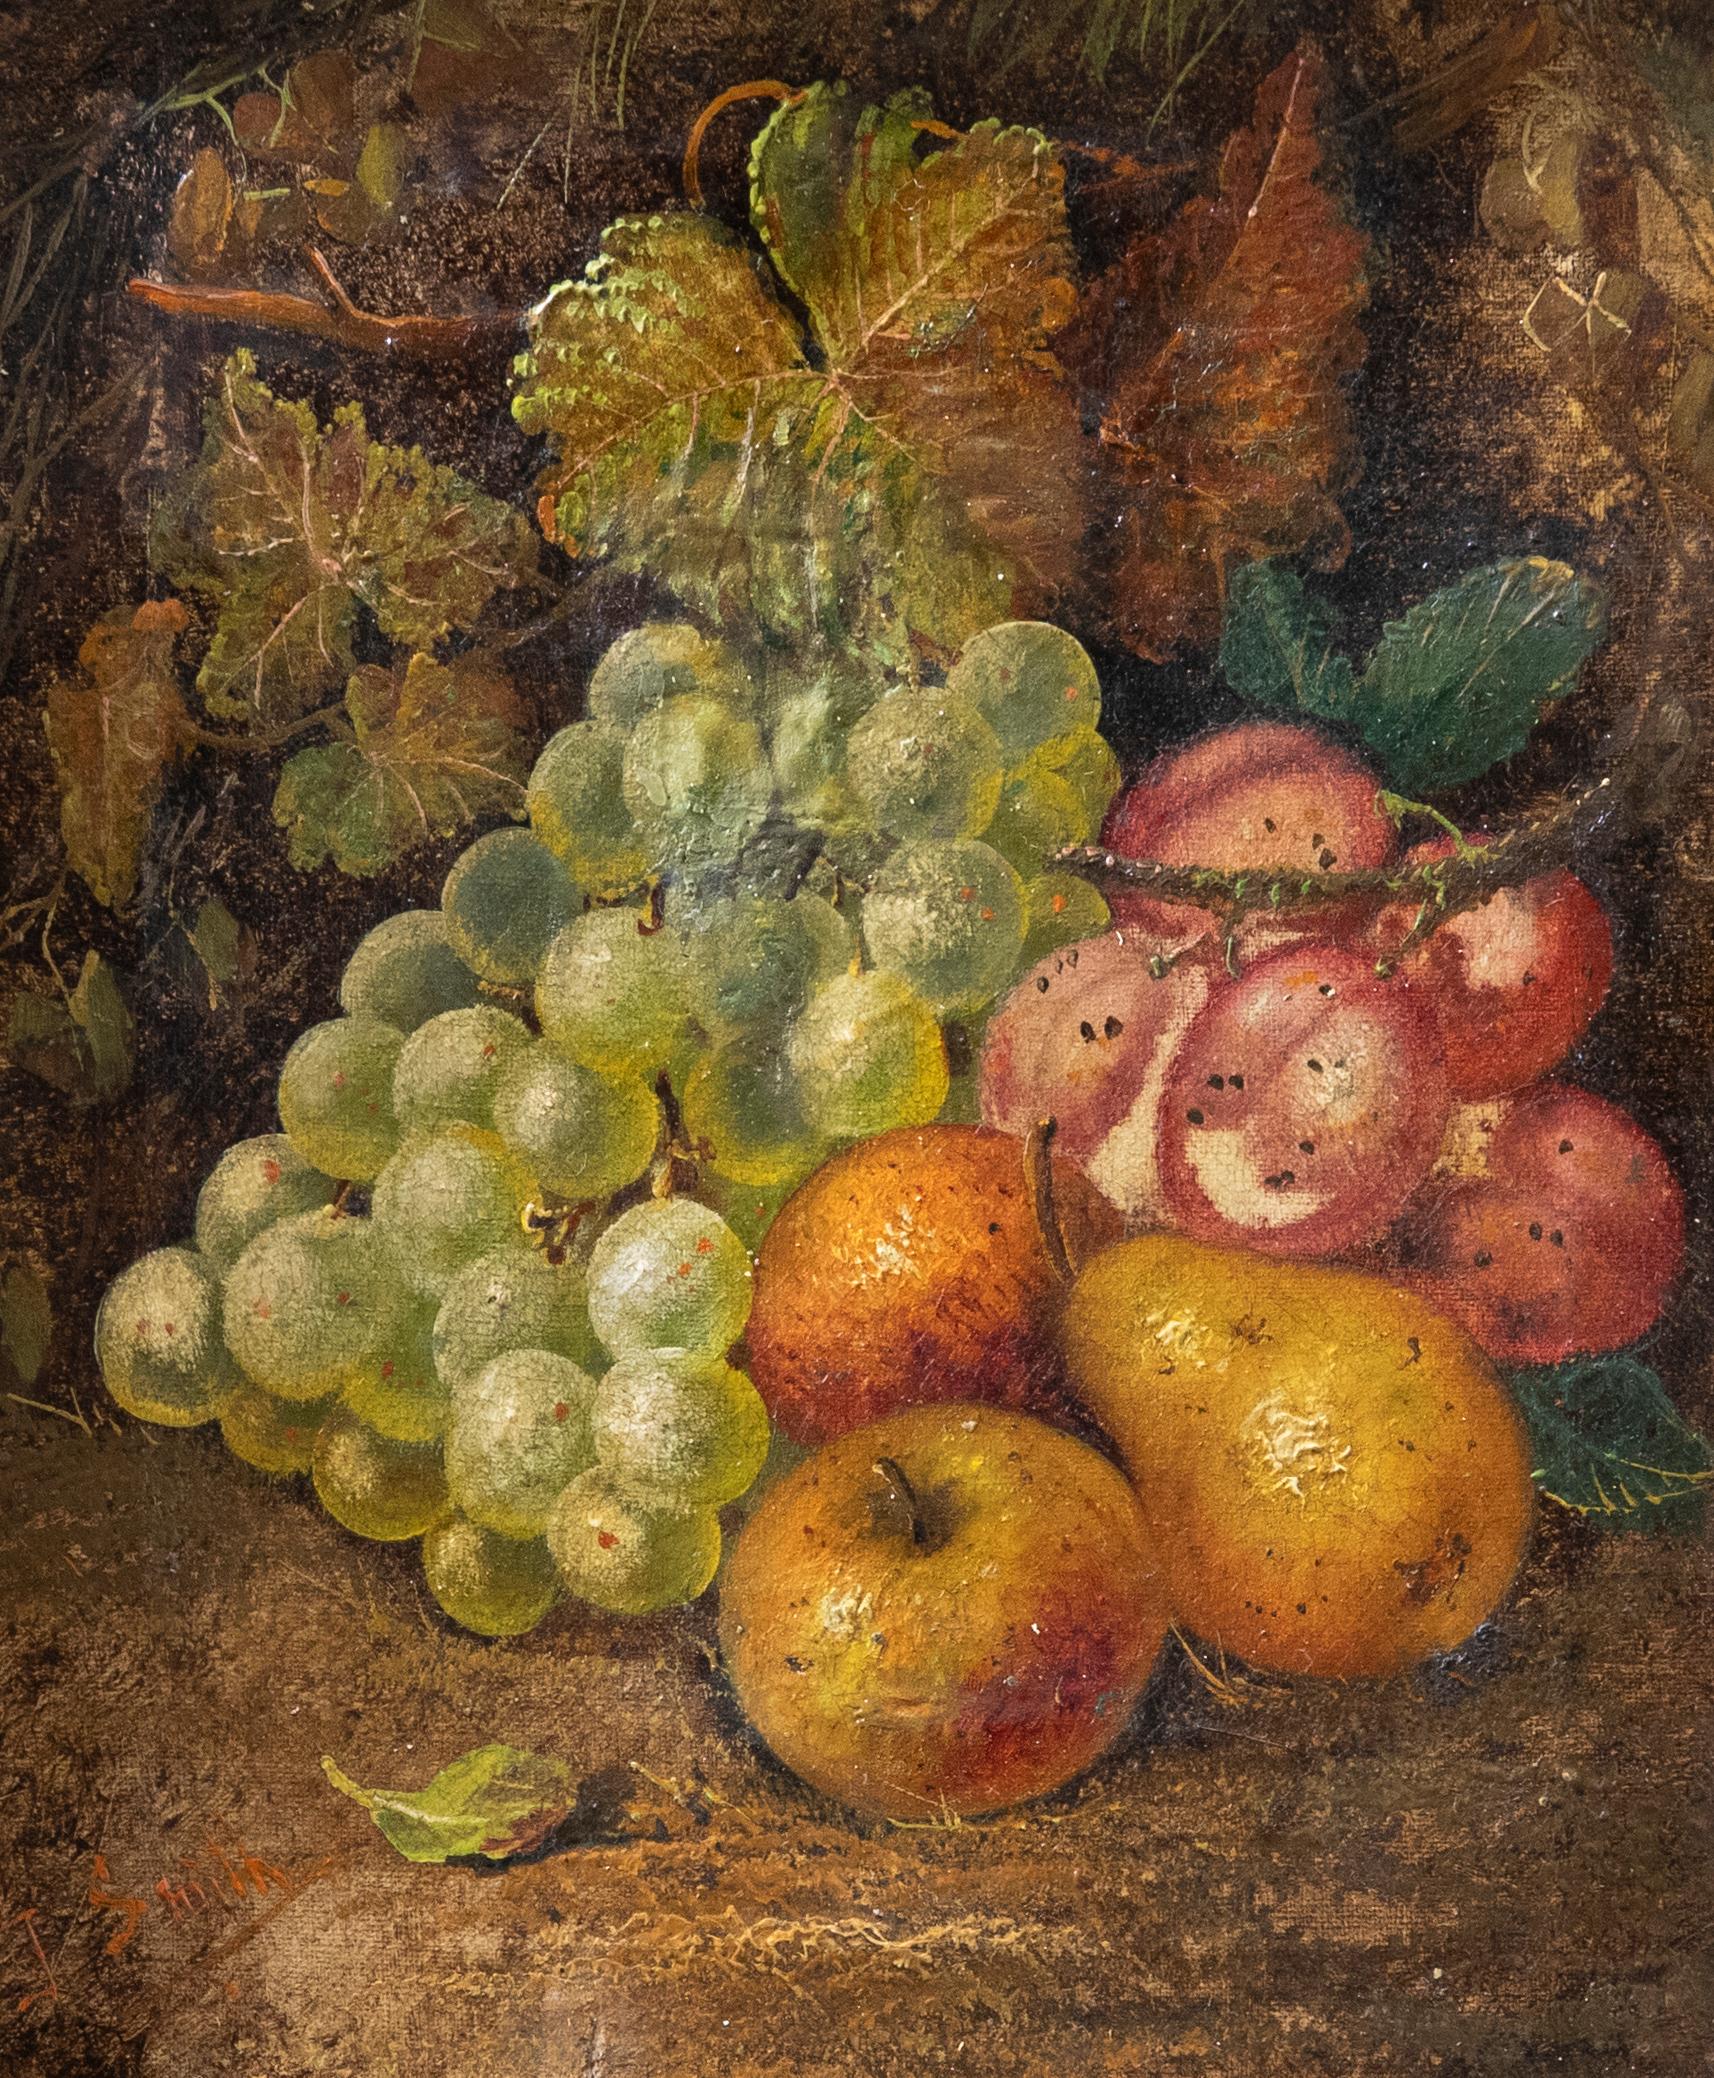 J. Smith - Framed Late 19th Century Oil, Still Life of Fruit in Leaves - Painting by Carl J. Smith